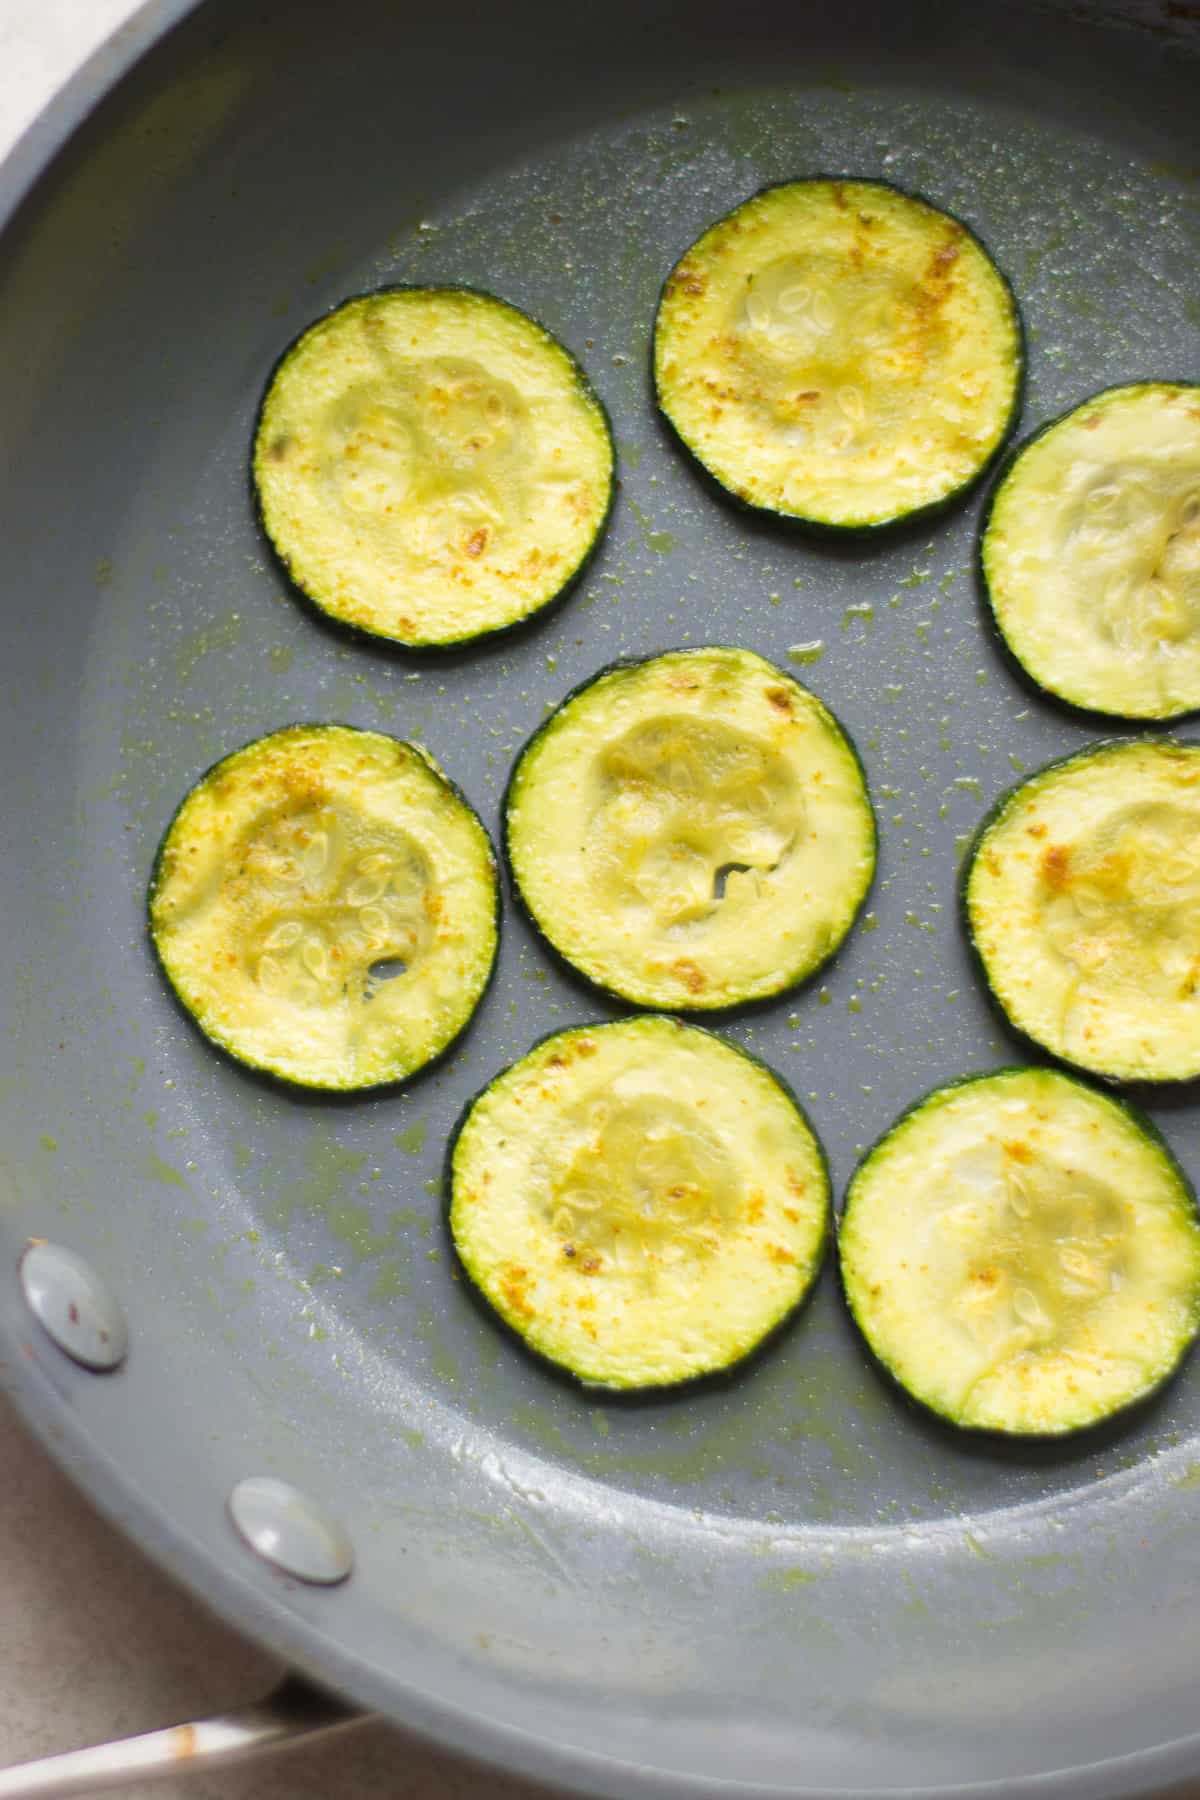 Sauteed zucchini rounds in a pan.